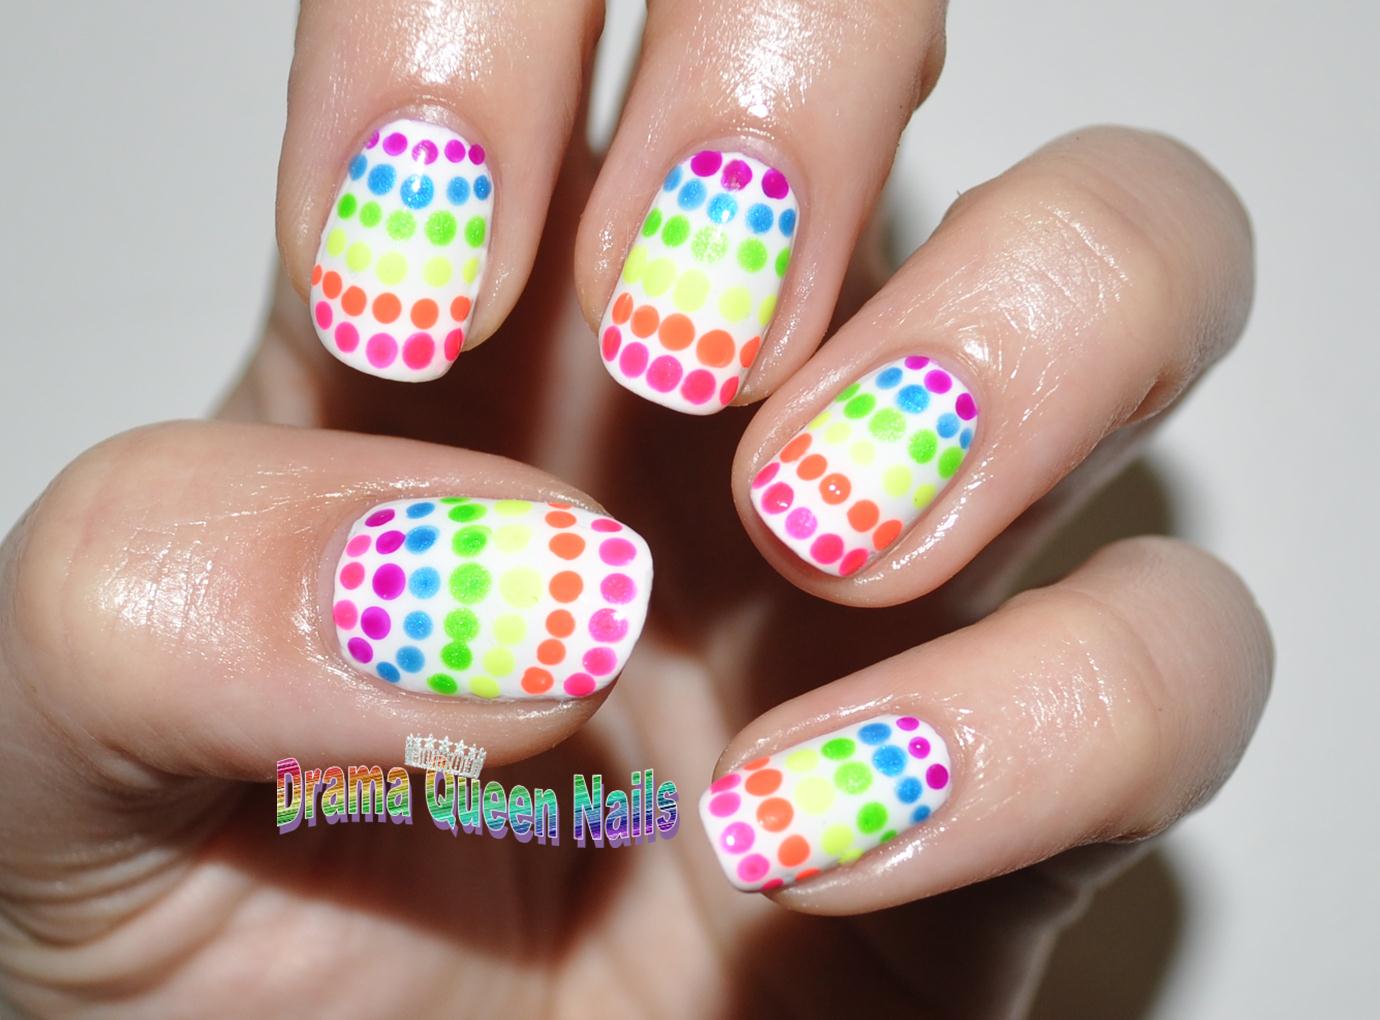 Drama Queen Nails: The 31 day Challenge 2013